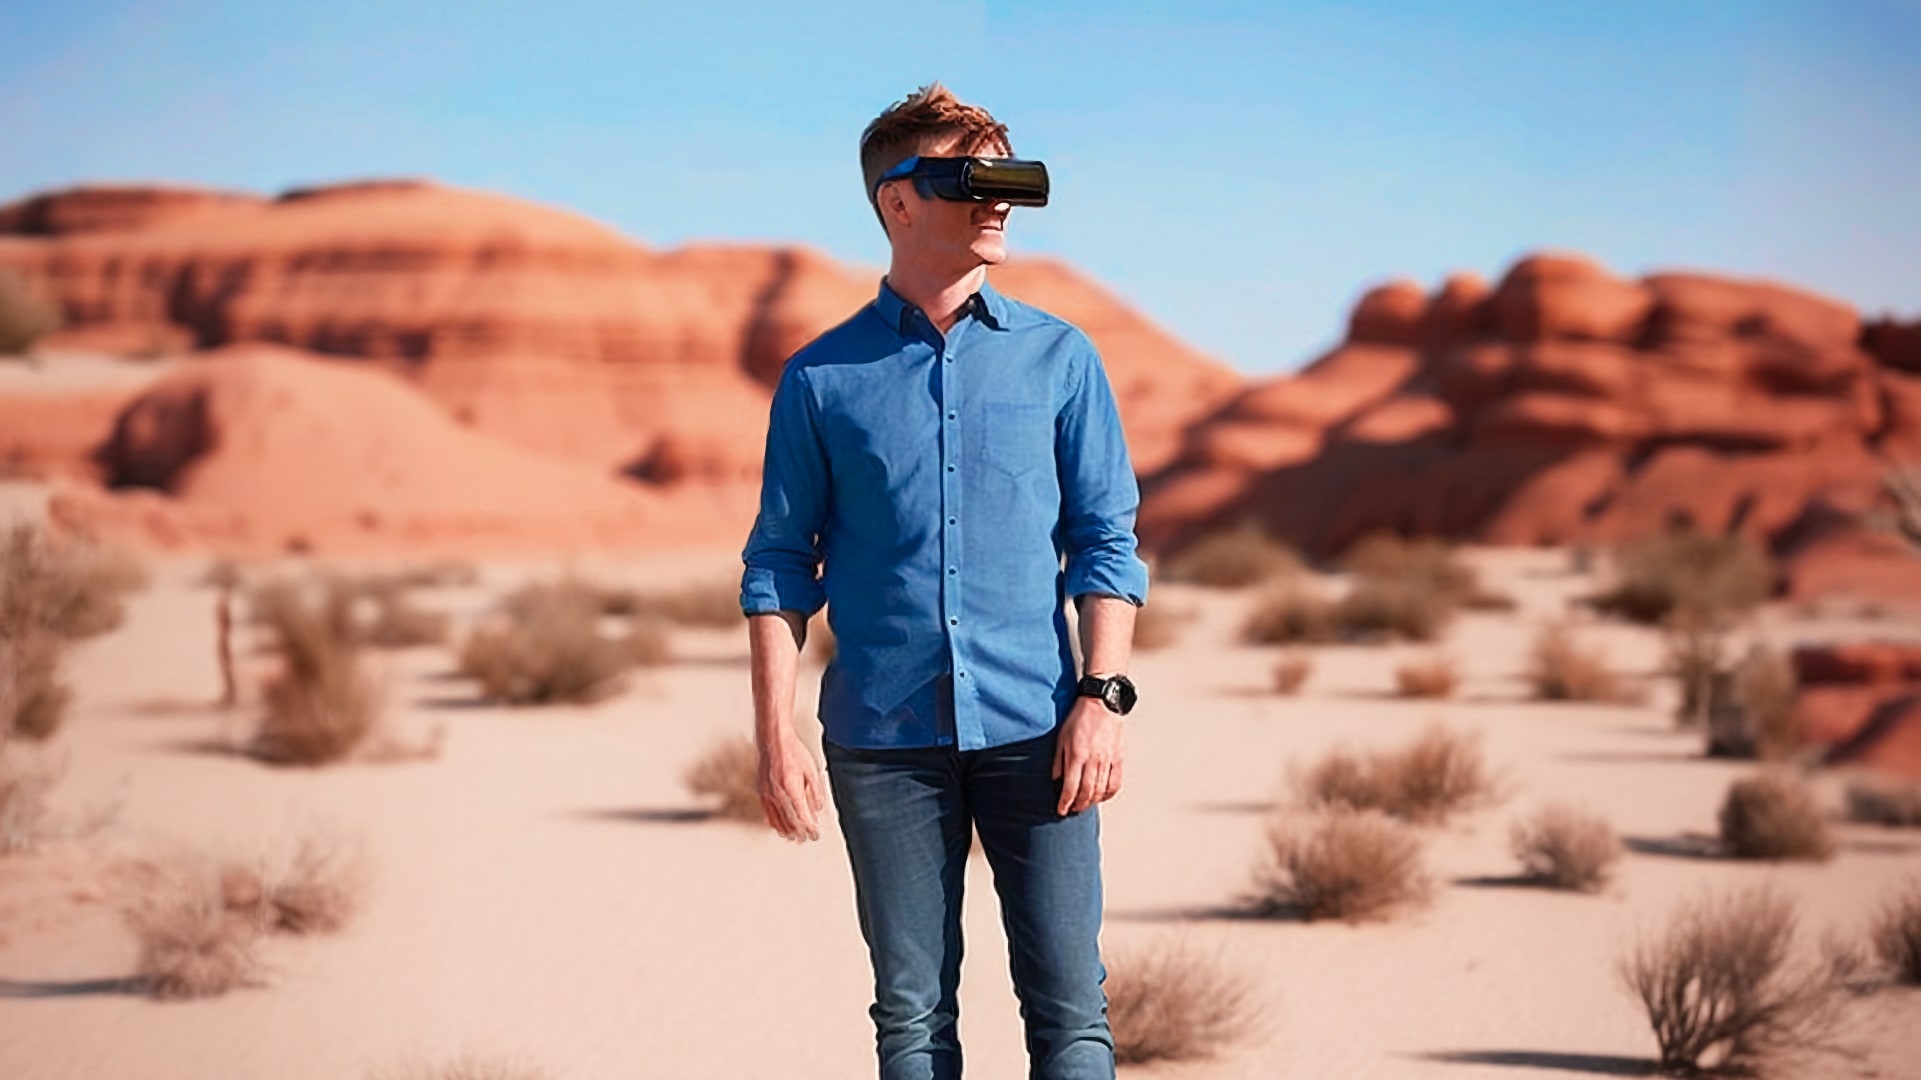 Next-Generation VR headsets: What's missing?